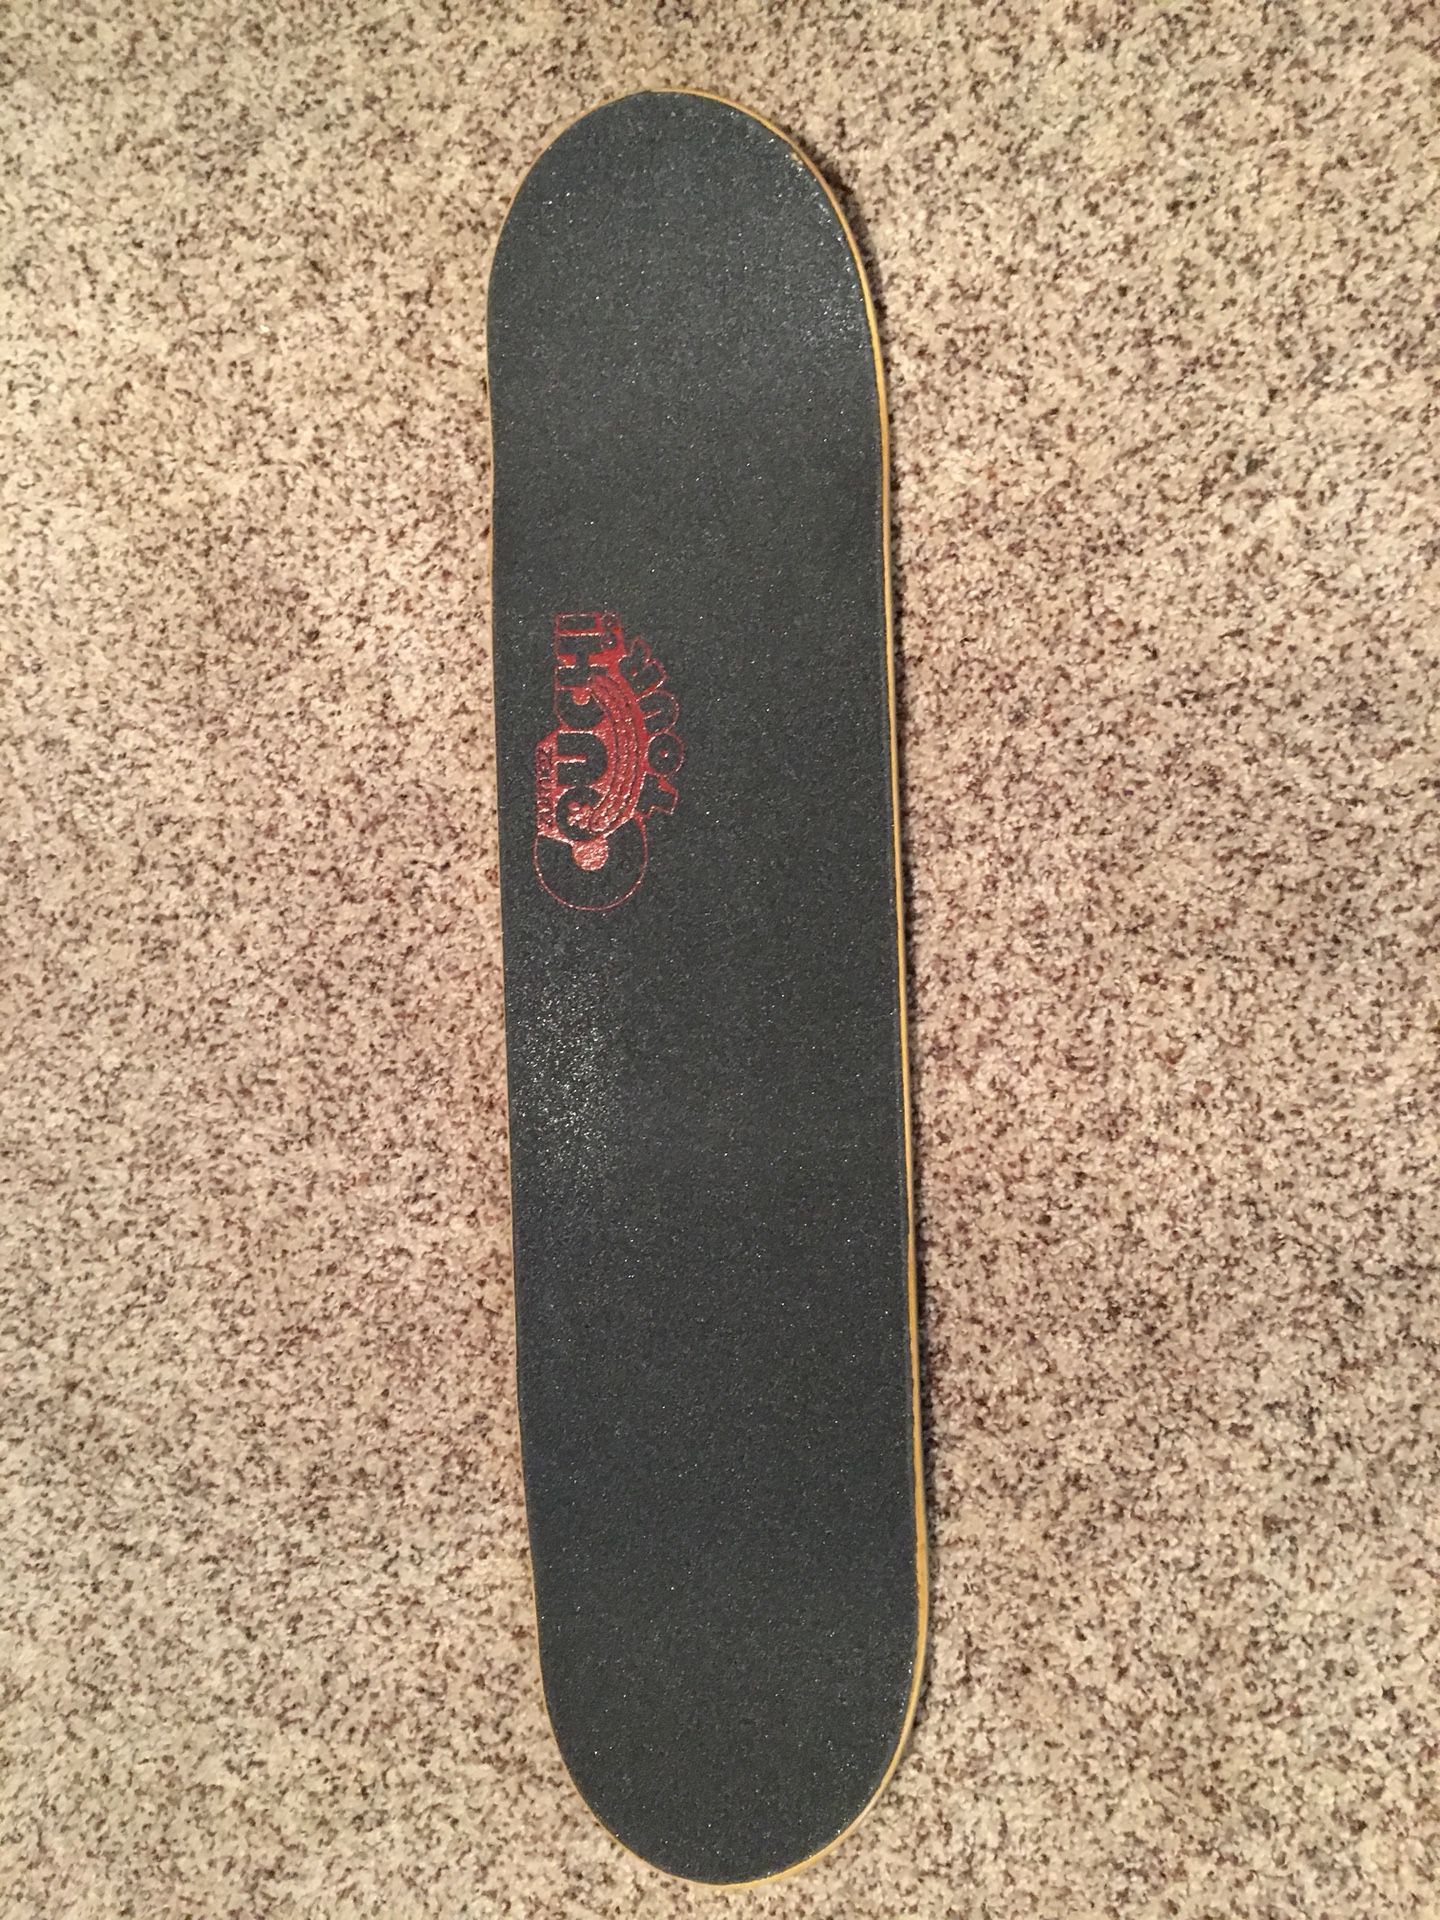 Zumiez Couch Tour Deck signed by team